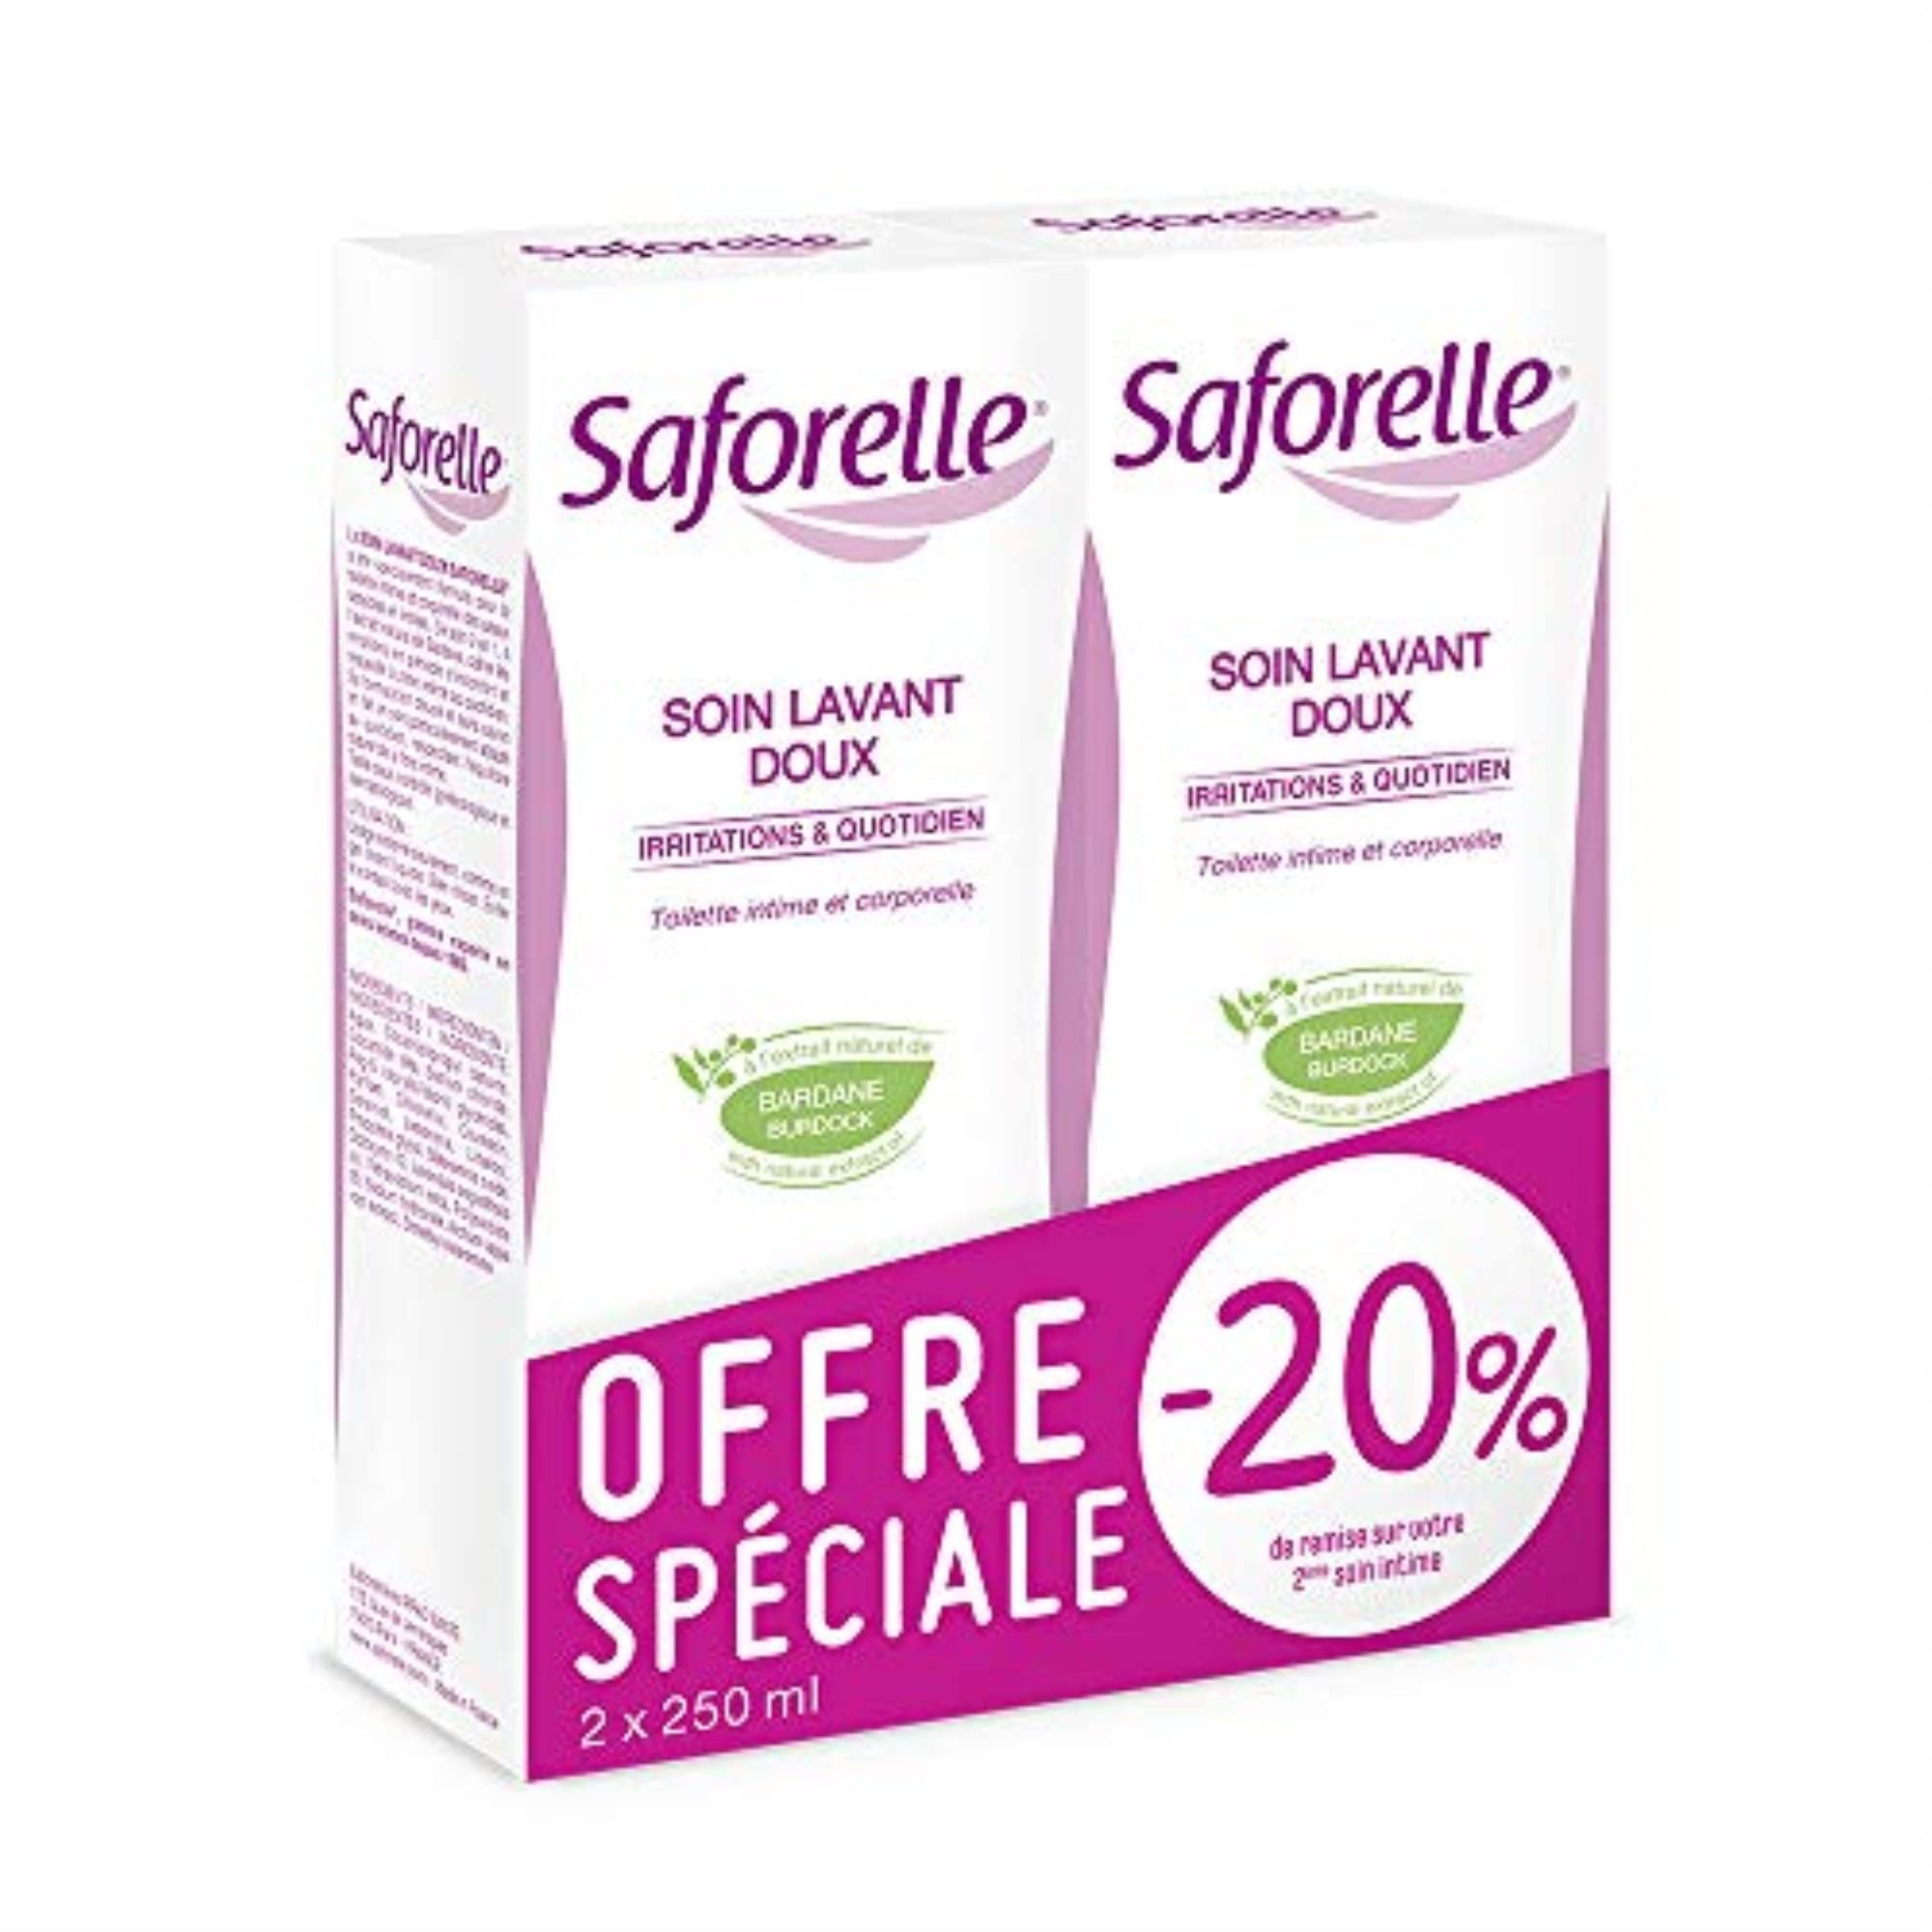 Saforelle Gentle Cleansing Care 2X250ml